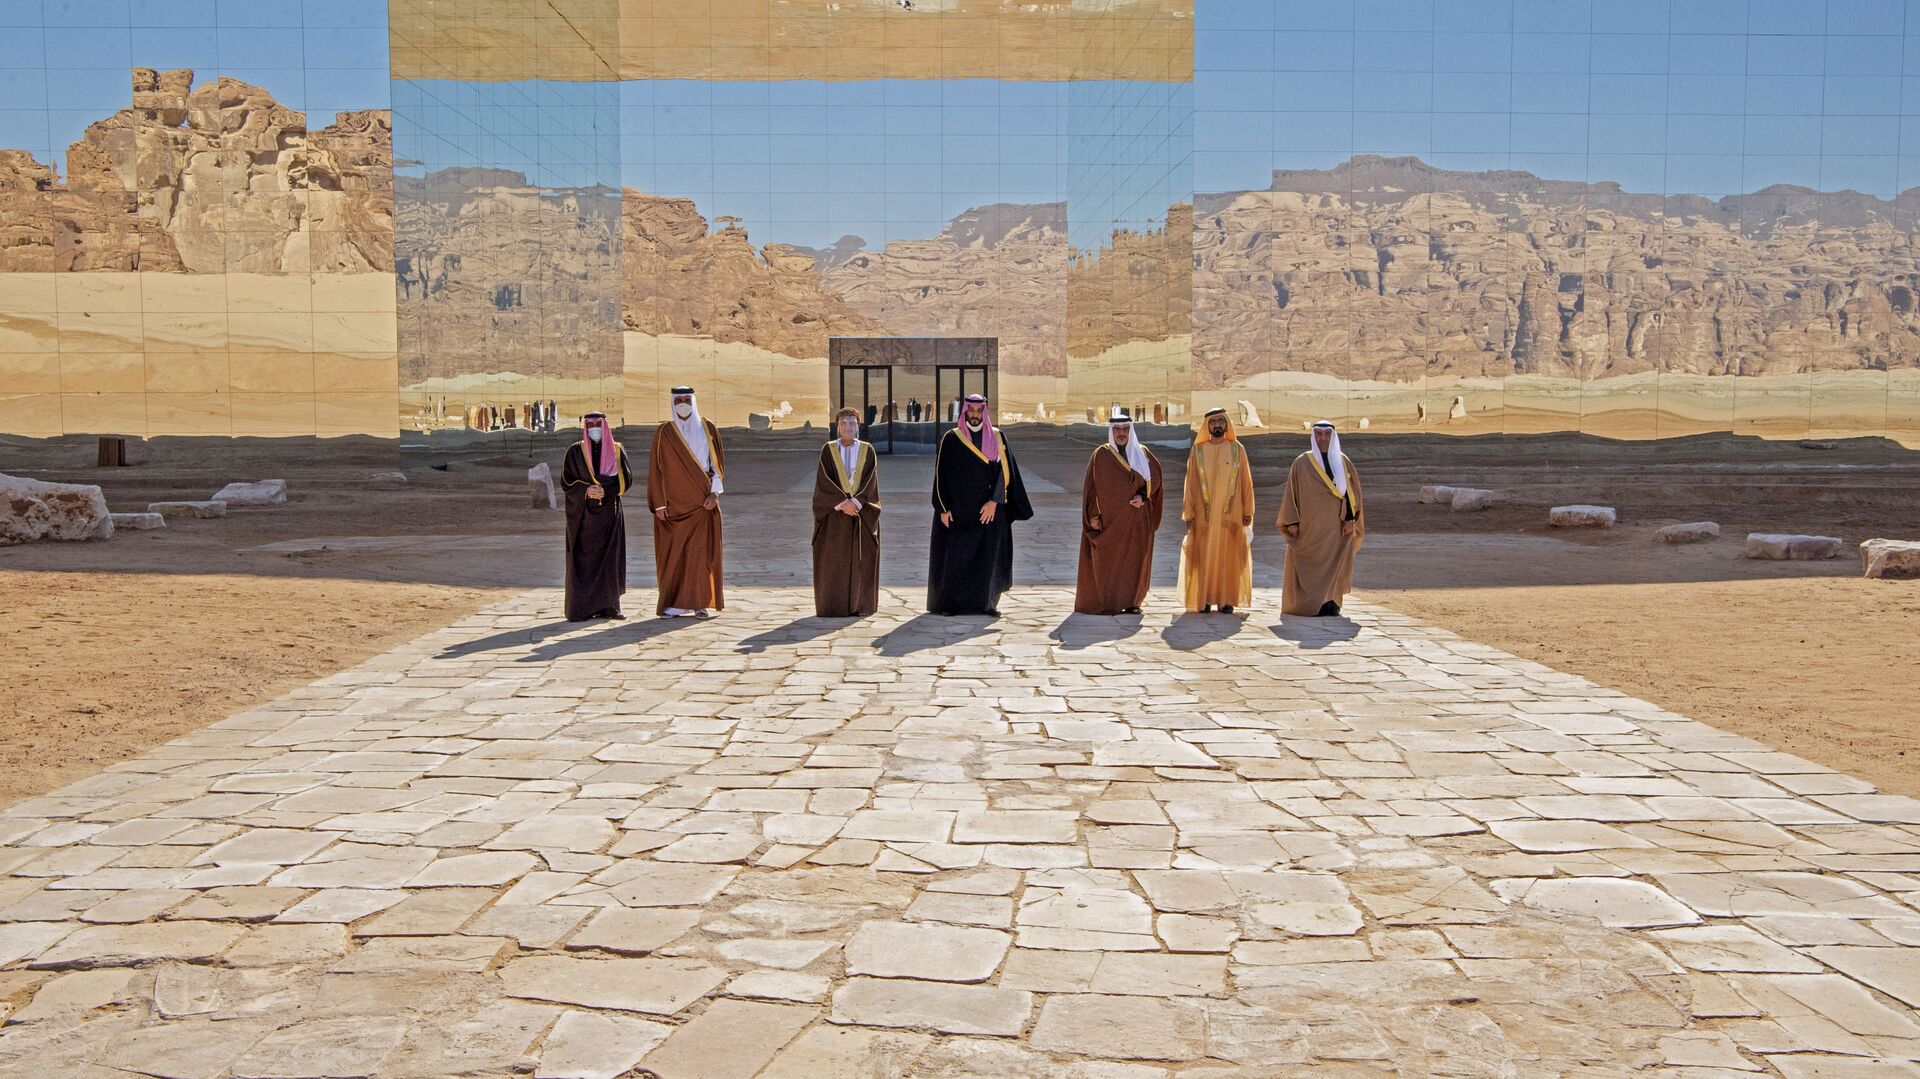 A handout picture provided by the Saudi Royal Palace on January 5, 2021, shows from L to R: Kuwaiti Emir Sheikh Nawaf al-Ahmad Al-Sabah, Emir of Qatar Tamim bin Hamad Al-Thani, Omani Deputy Prime Minister Fahd Bin Mahmud, Saudi Crown Prince Mohammed bin Salman, Bahrain's Crown Prince Salman bin Hamad Al-Khalifa, Dubai's Ruler and UAE Vice President Sheikh Mohammed bin Rashid Al-Maktoum and Nayef al-Hajraf, secretary-general of the Gulf Cooperation Council (GCC) posing for a pictures before the opening session of the 41st Gulf Cooperation Council (GCC) summit in the northwestern Saudi city of al-Ula. - Saudi Arabia's Crown Prince Mohammed bin Salman said that the Gulf states had signed an agreement on regional solidarity and stability at a summit aimed at resolving a three-year embargo against Qatar.  - Sputnik International, 1920, 28.02.2021